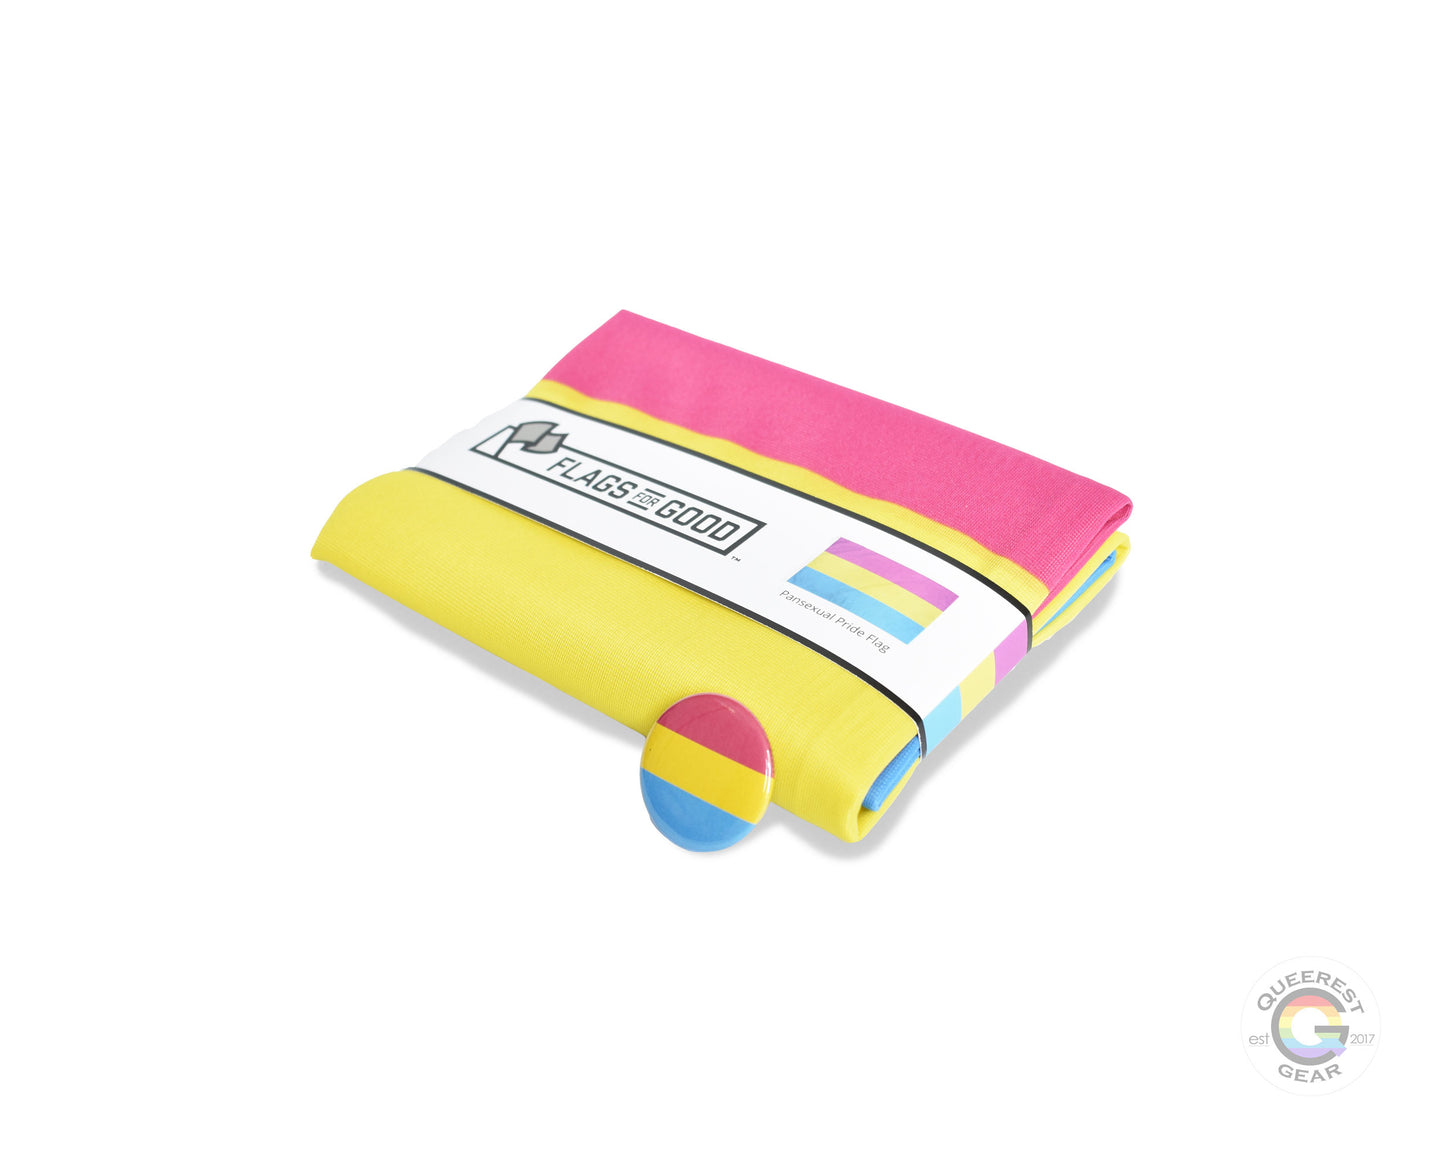  The pansexual pride flag folded in its packaging with the matching free pansexual flag button